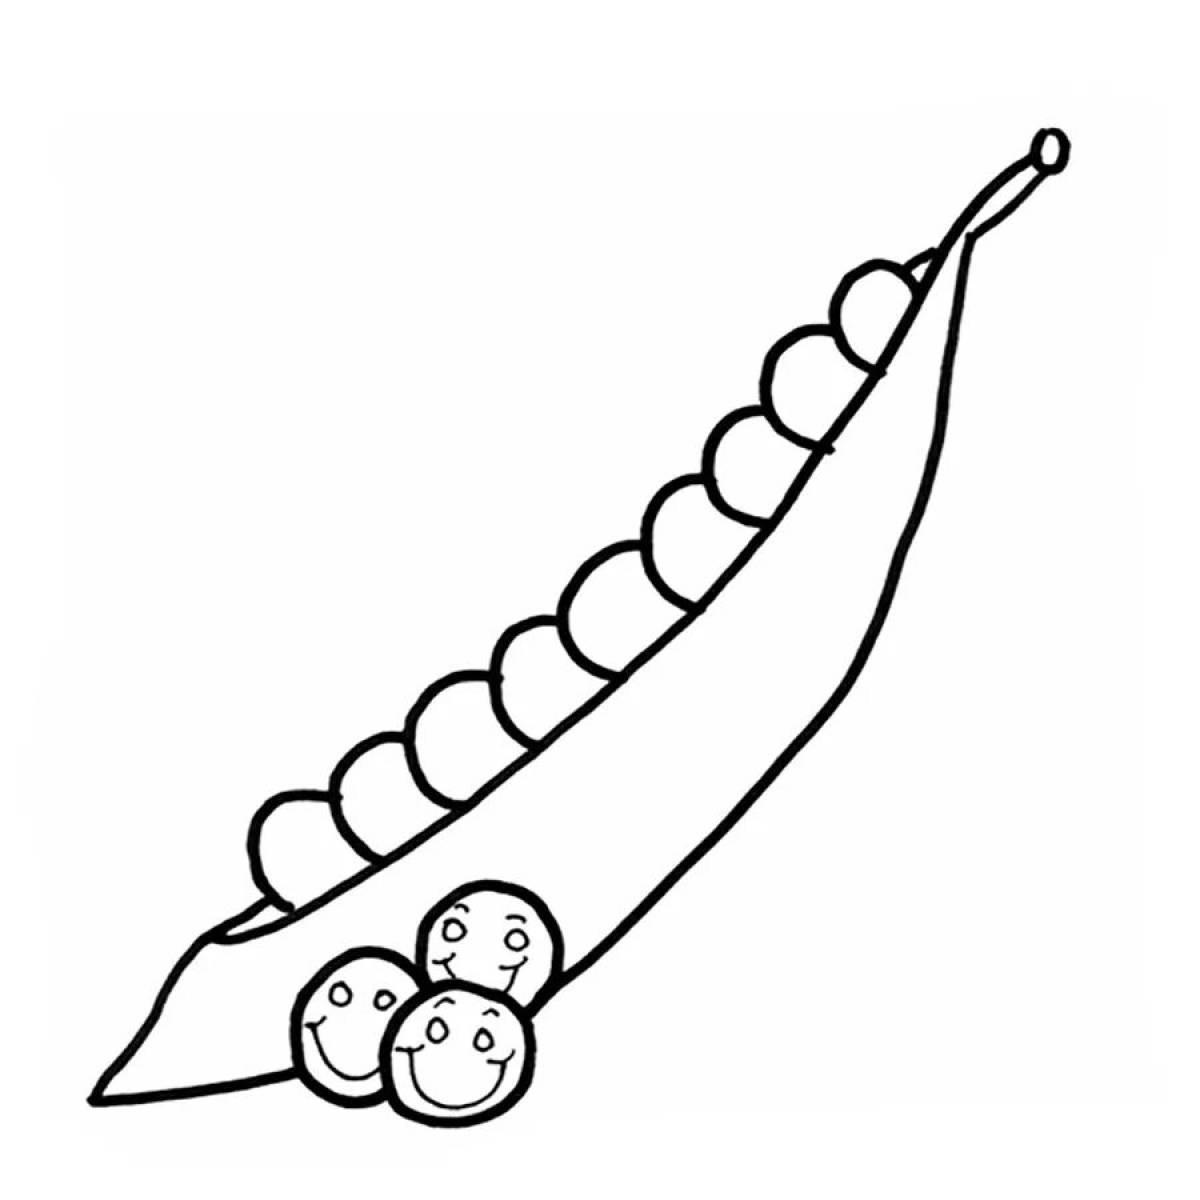 Coloring page of fun peas for new kids